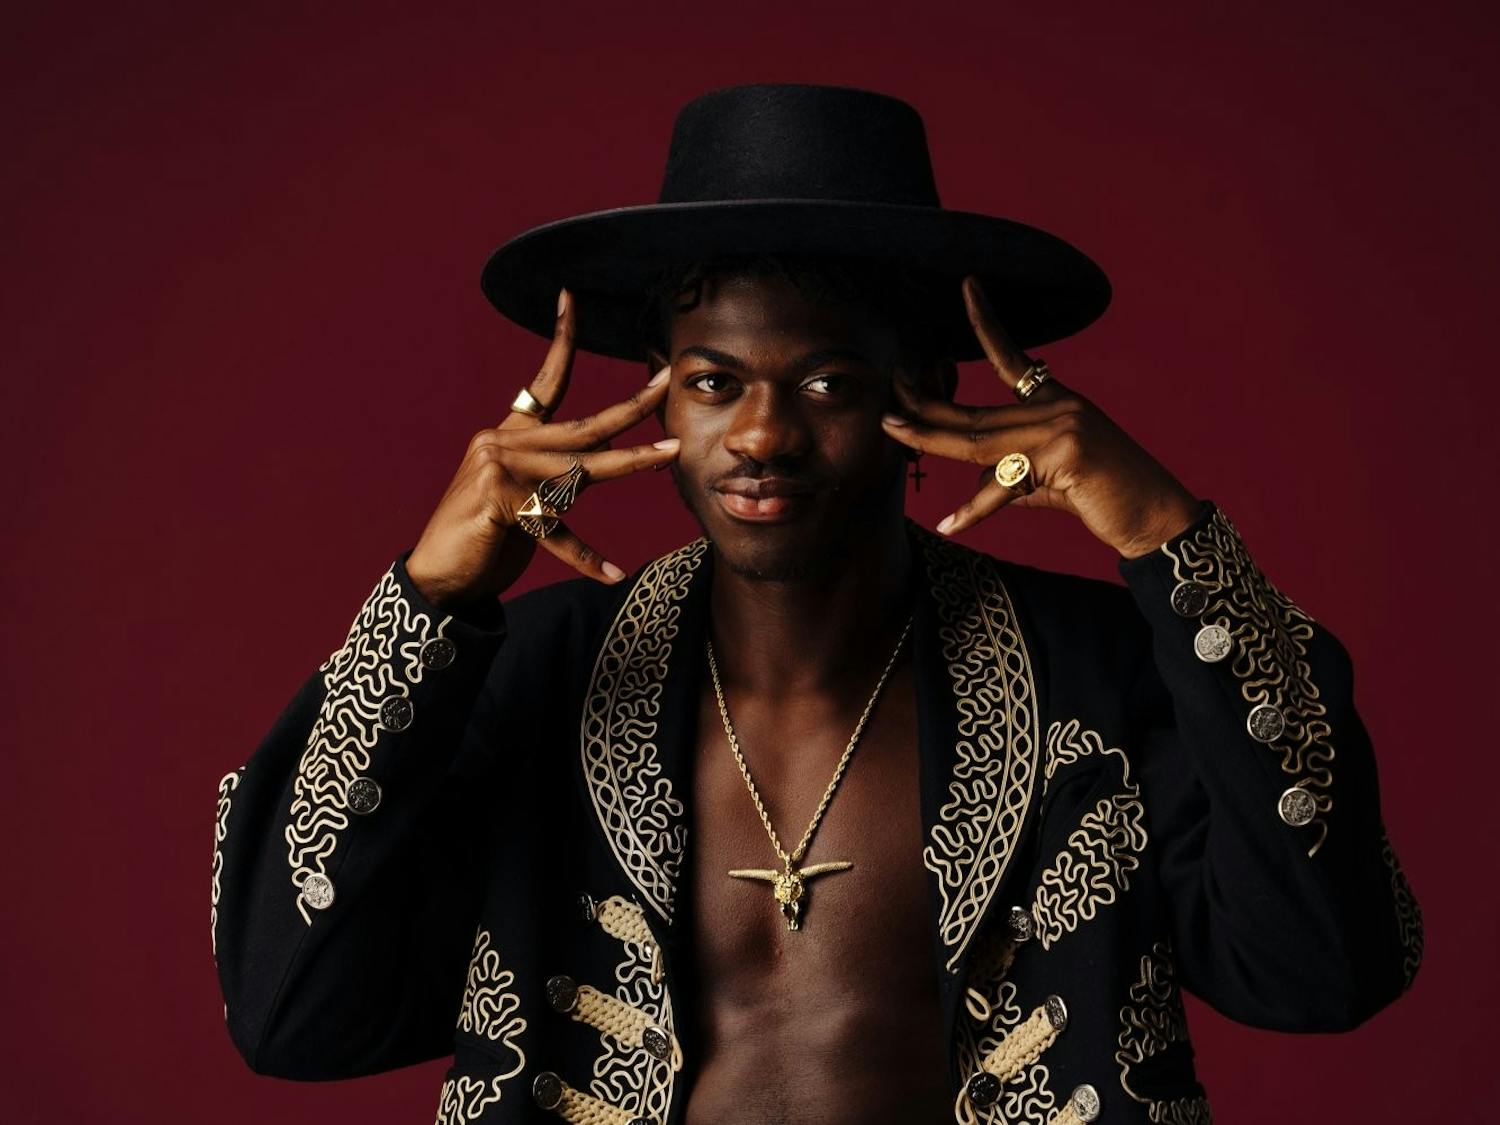 Lil Nas X poses for a portrait at Cactus Cube Studio on Thursday, Dec. 5, 2019 in West Hollywood, Calif. Photo courtesy of Kent Nishimura.